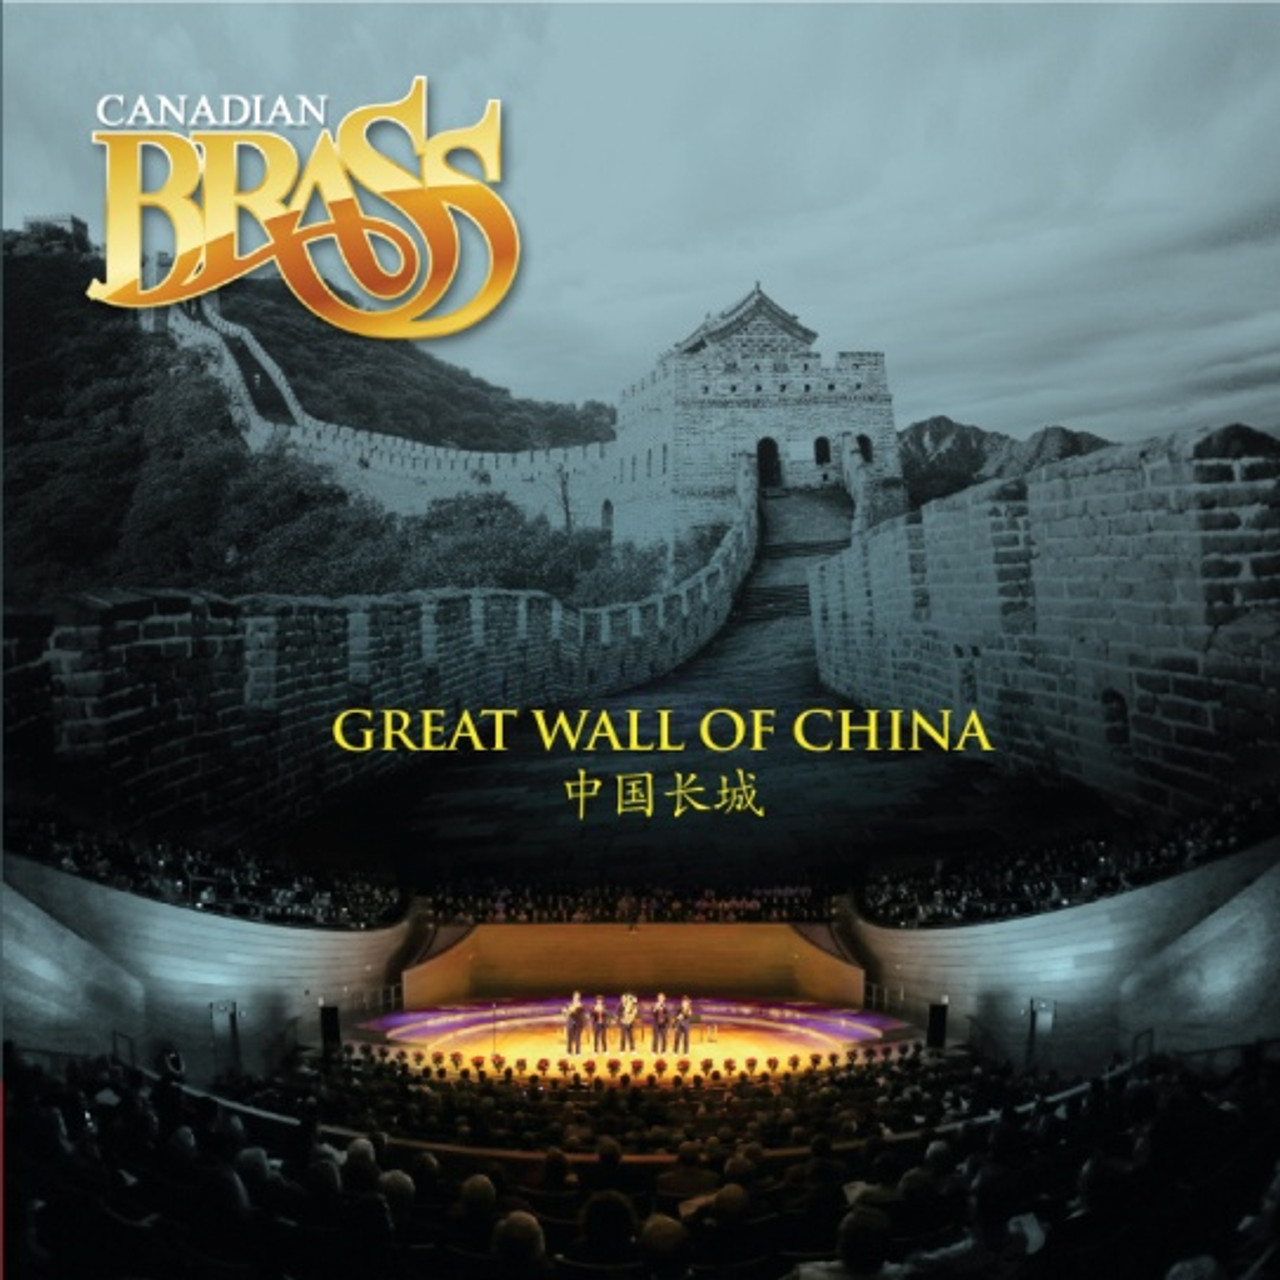 Canadian Brass: Great Wall of China MP3 Digital download